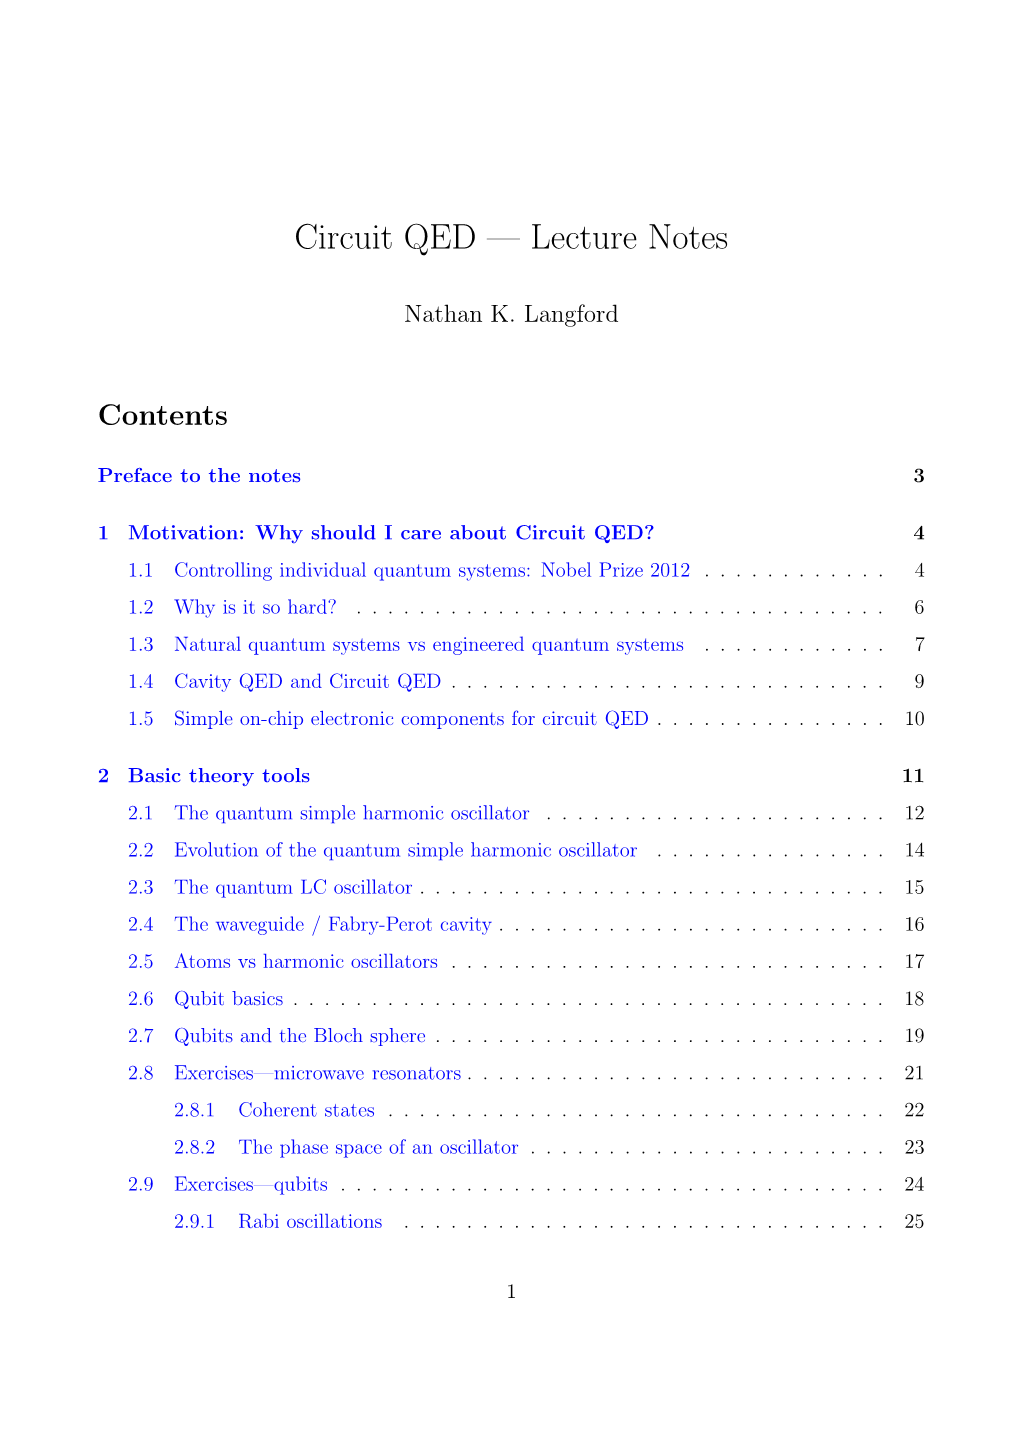 Circuit QED — Lecture Notes